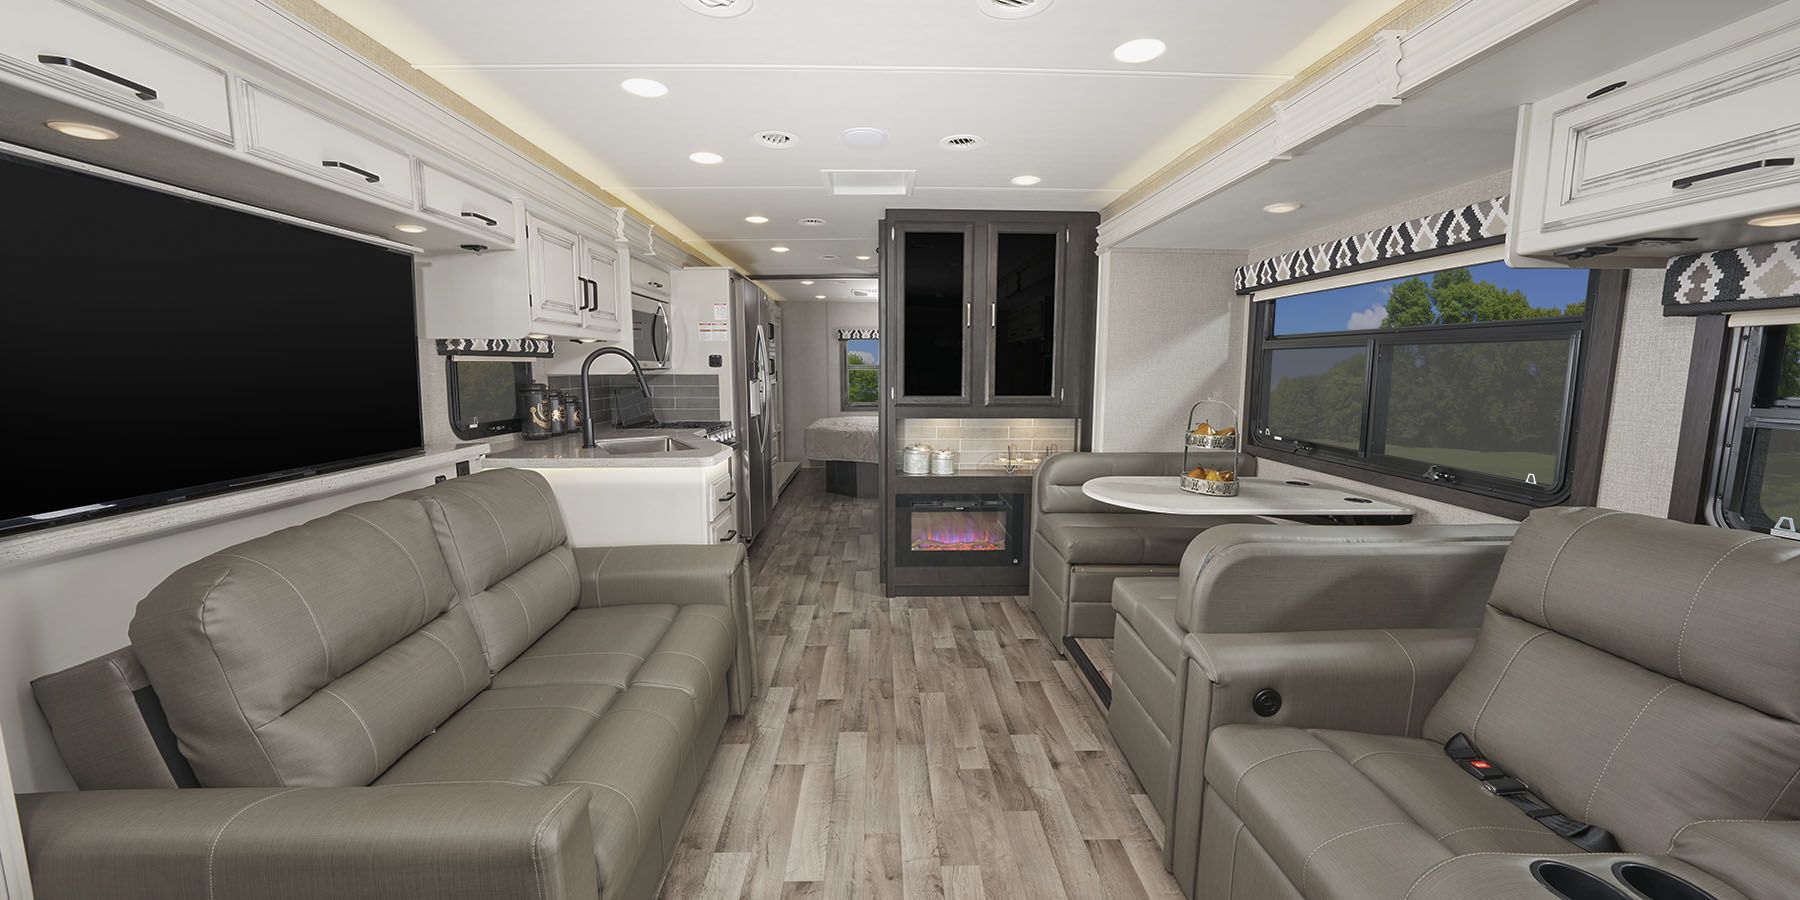 2021 Precept Mid Size Class A Rv, Class A Rv With King Size Bed